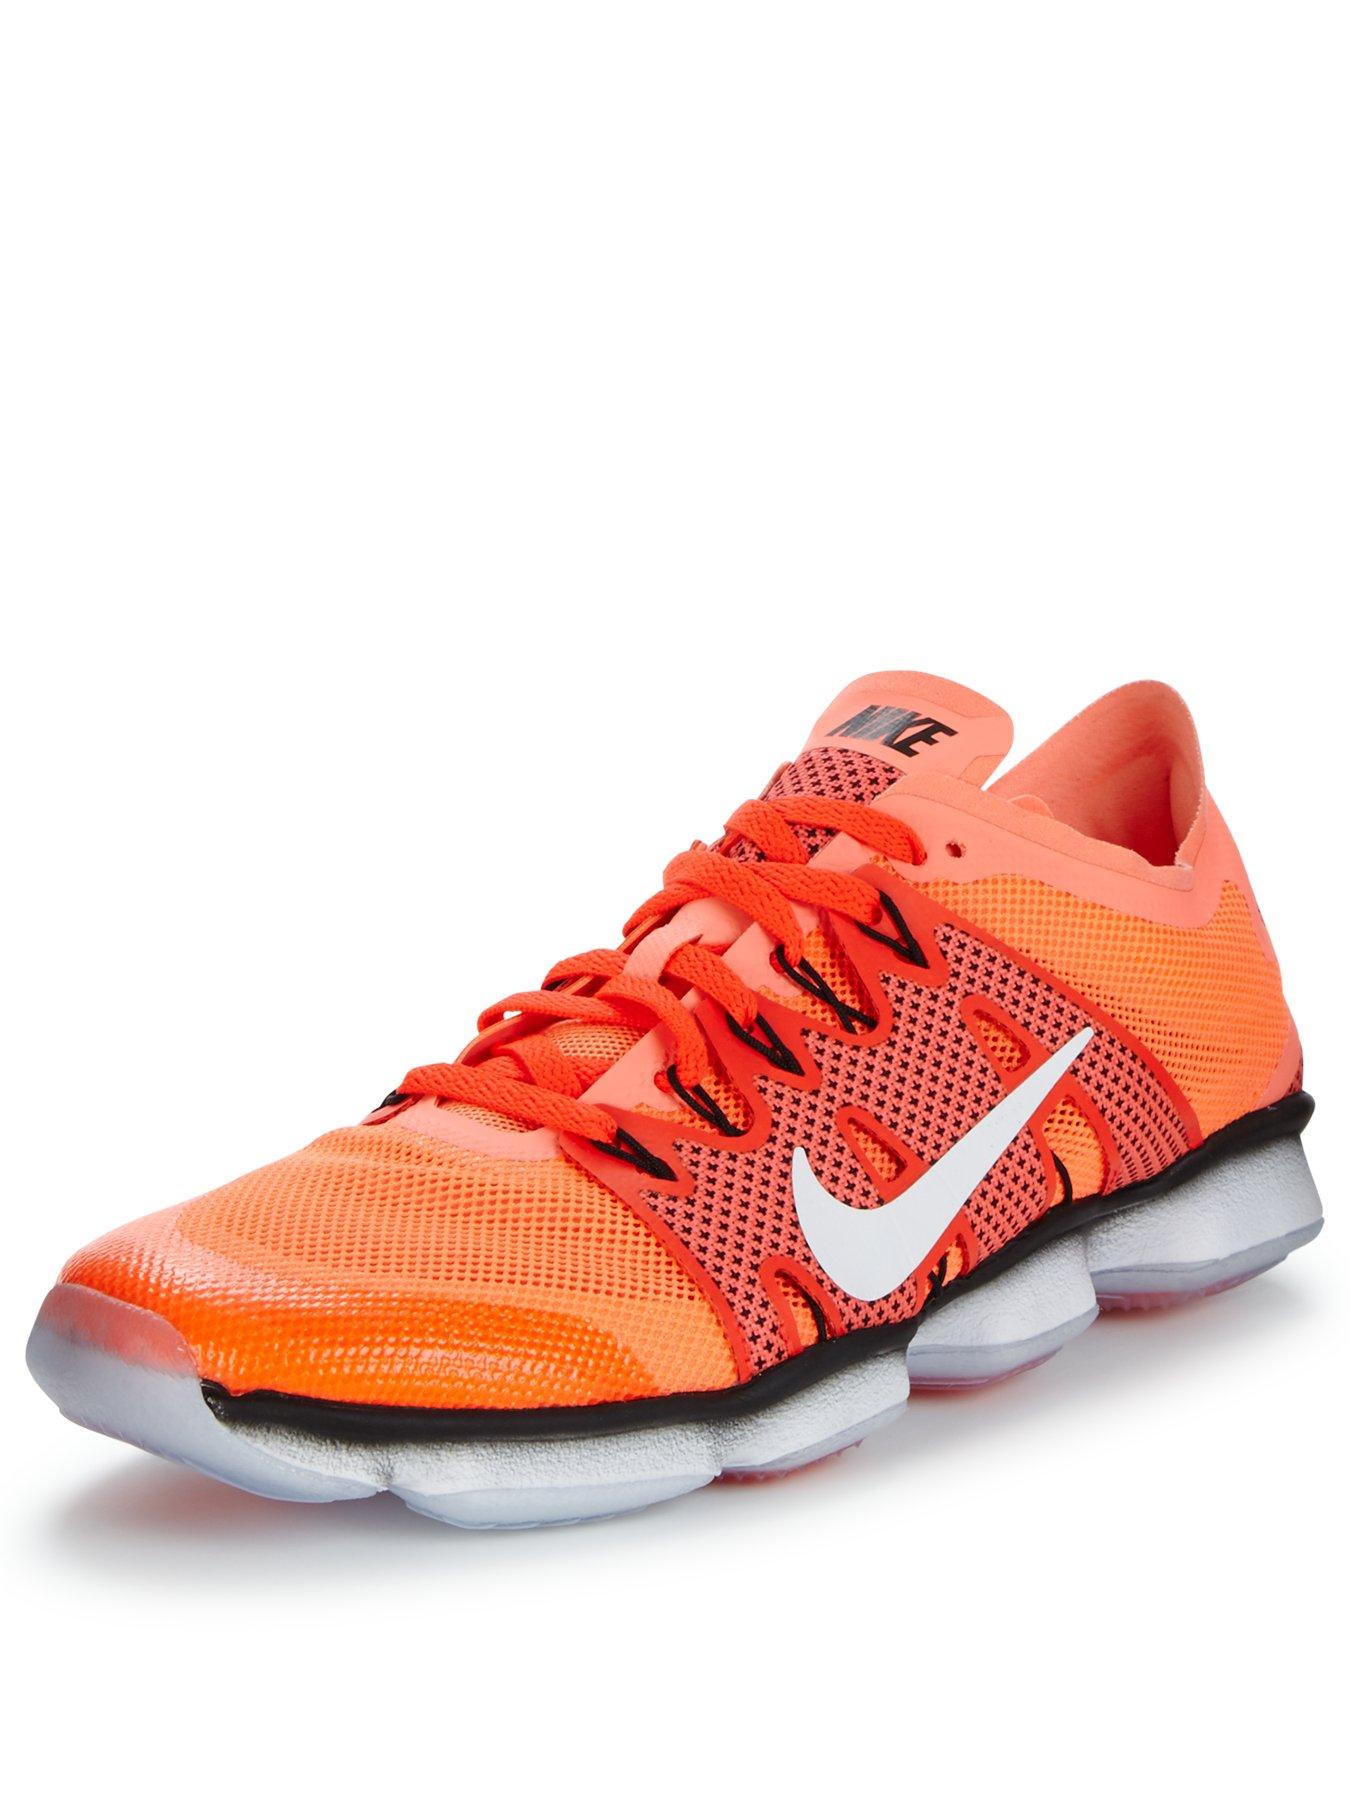 nike air zoom fitness review